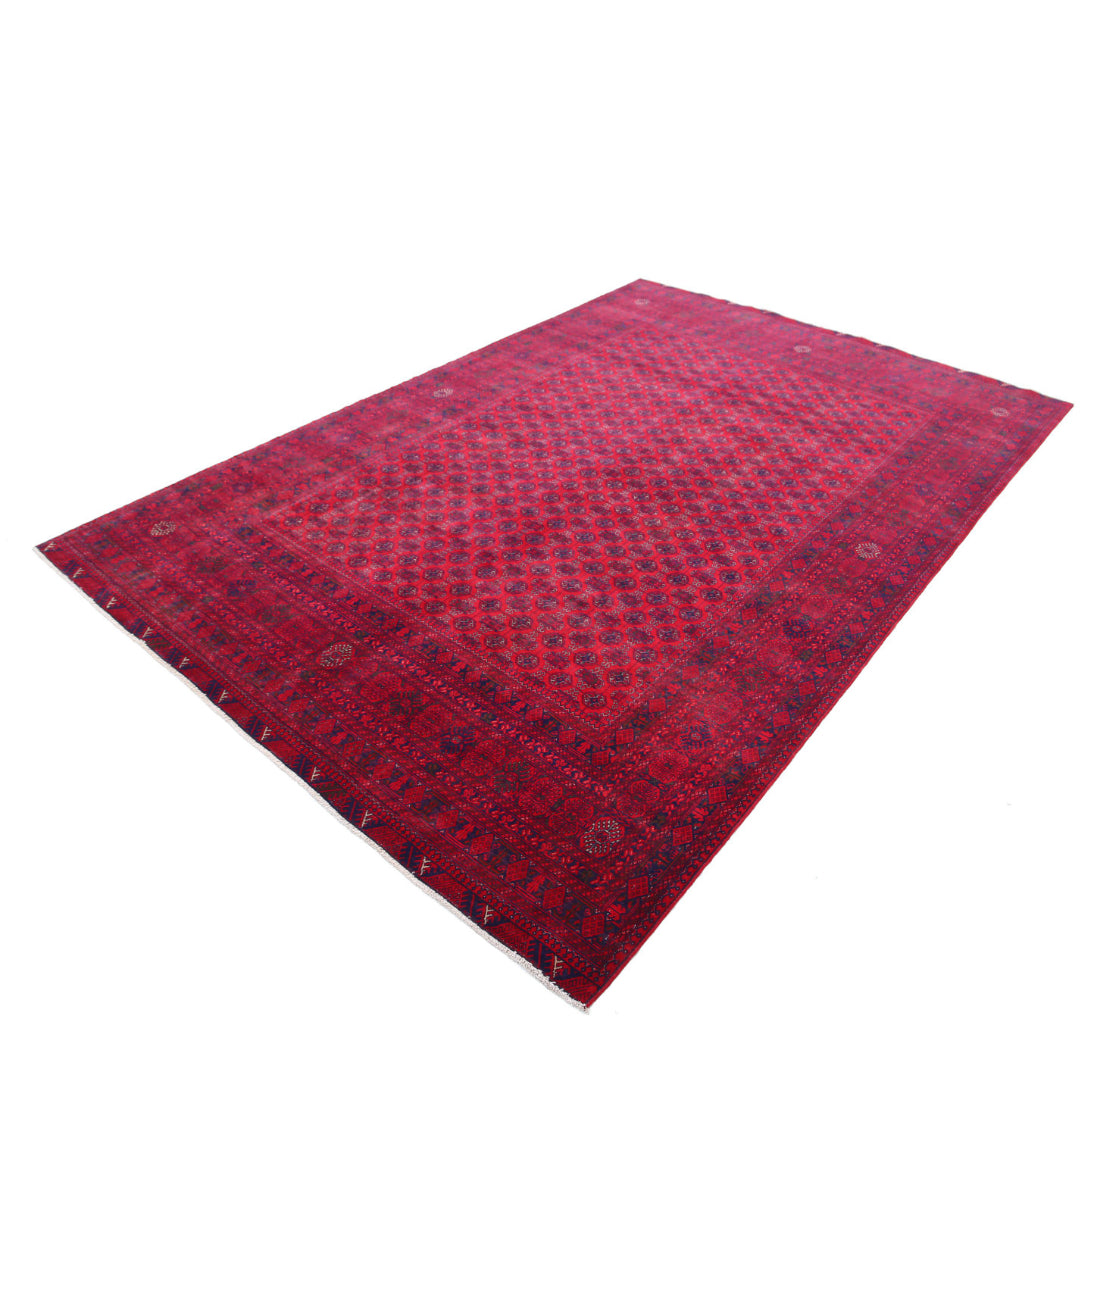 Hand Knotted Afghan Beljik Wool Rug - 6'5'' x 9'7'' 6'5'' x 9'7'' (193 X 288) / Red / Red